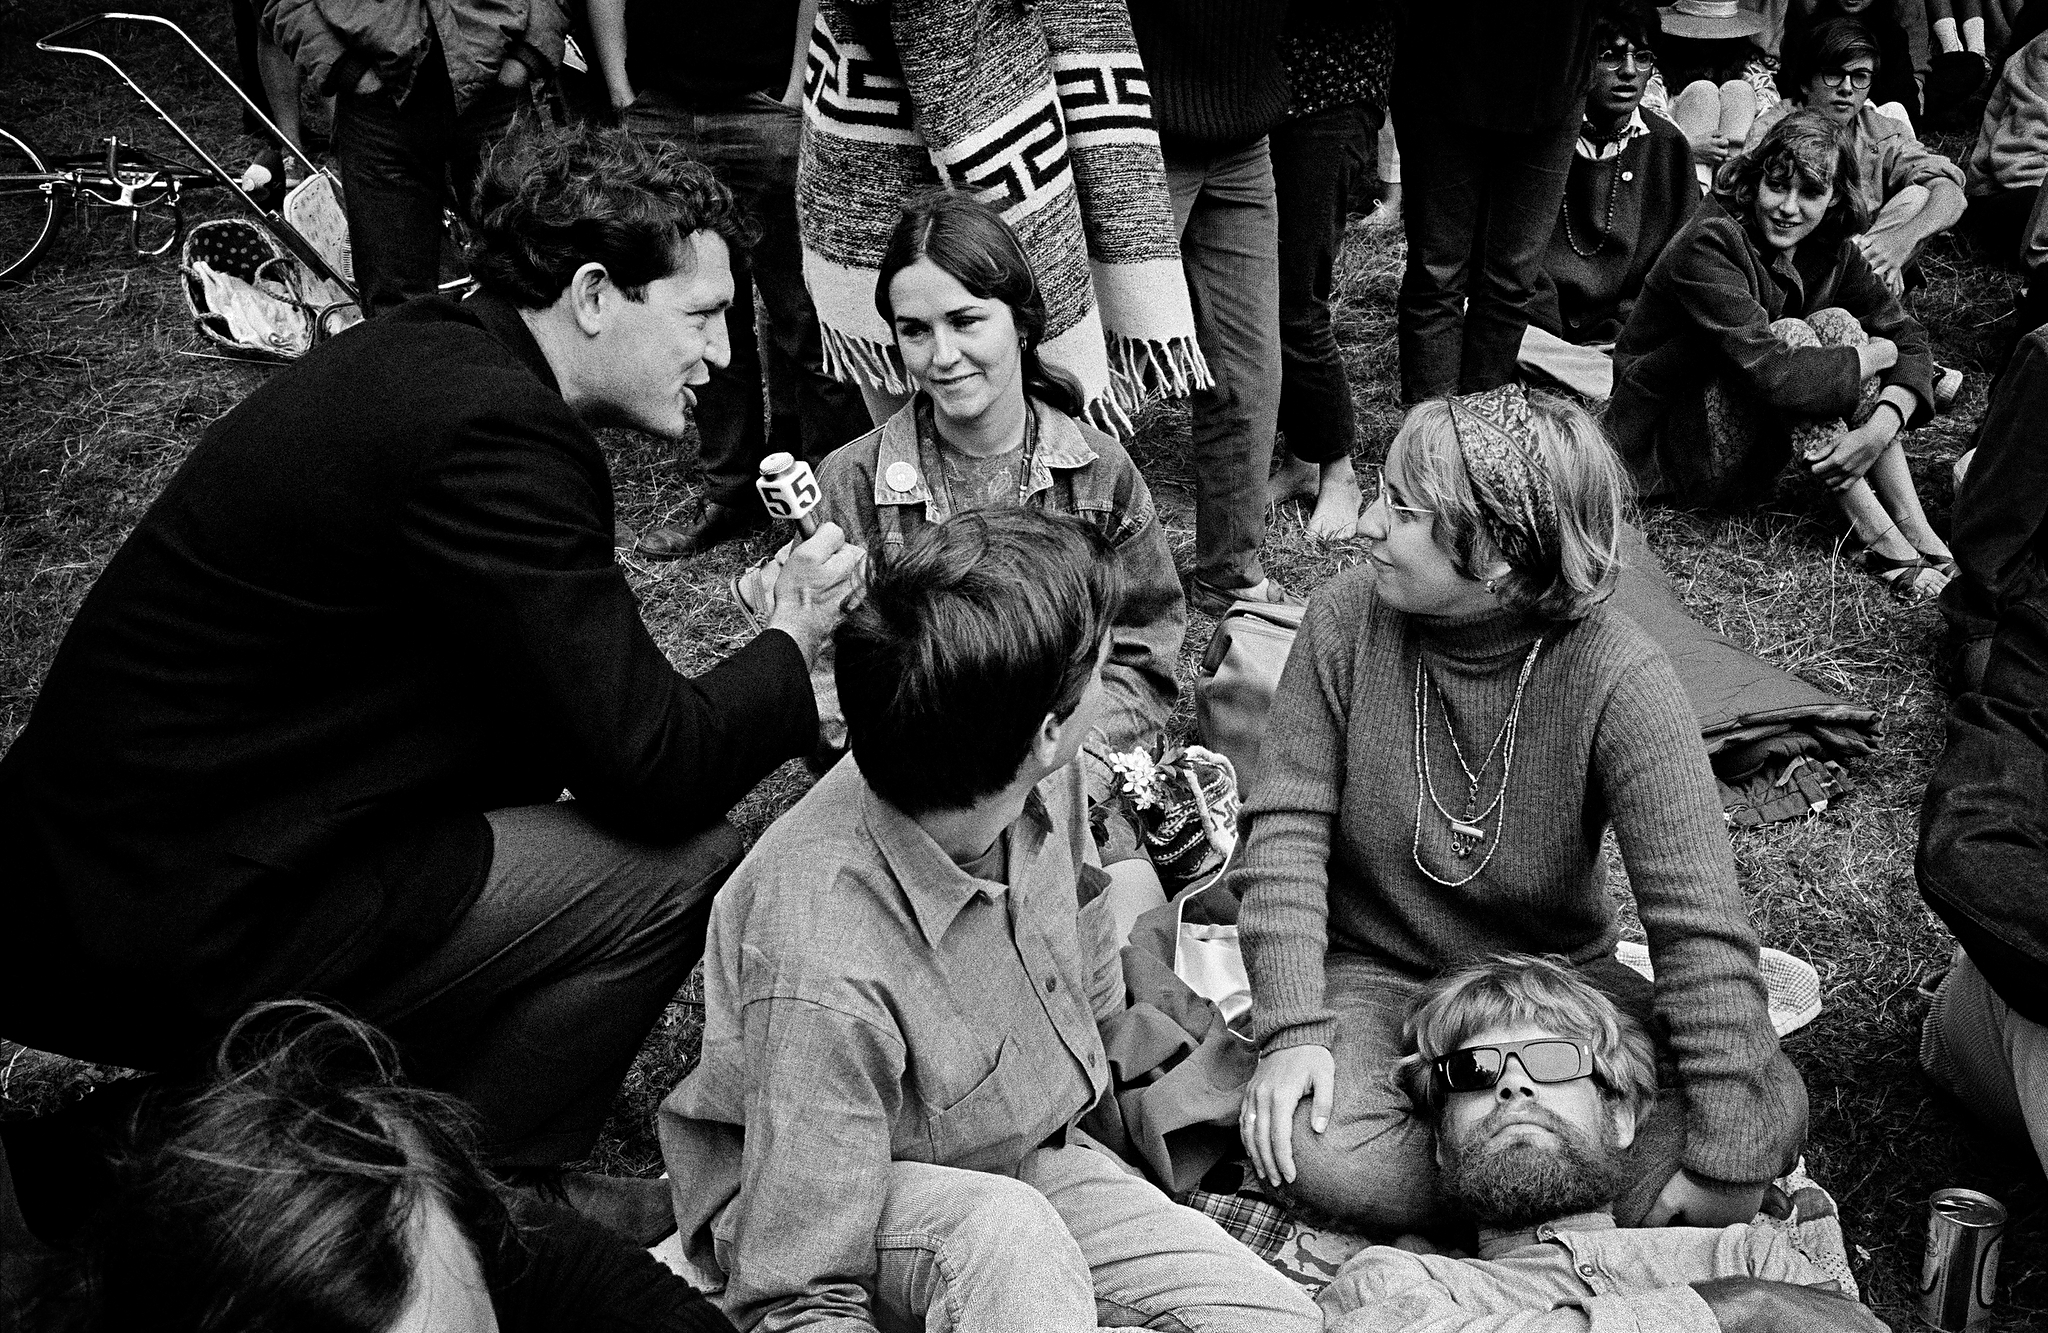 For the establishment, 'this hippie thing' was hard to embrace